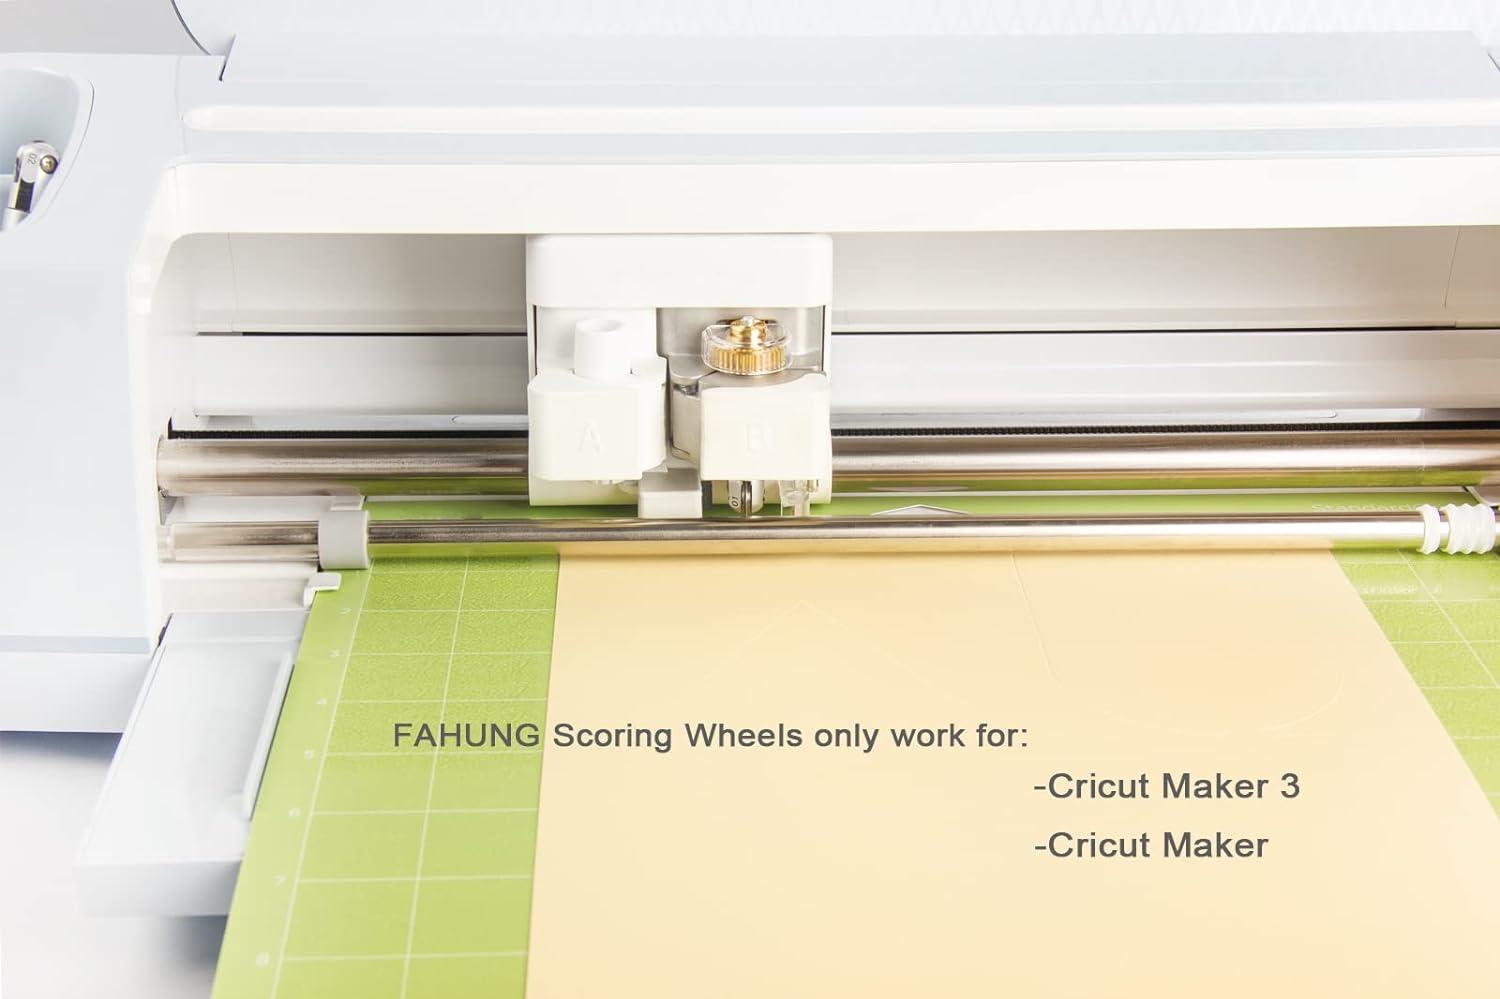 Scroing Wheel Combo Pack Maker Tool for Cricut Single & Double Scoring Wheel  Compatible with Cricut Maker 3/Cricut Maker Scoring Wheel Scoring Tool for  Cricut Folds Cards/Envelopes/Boxes/3D Creations 01 Tip & 02